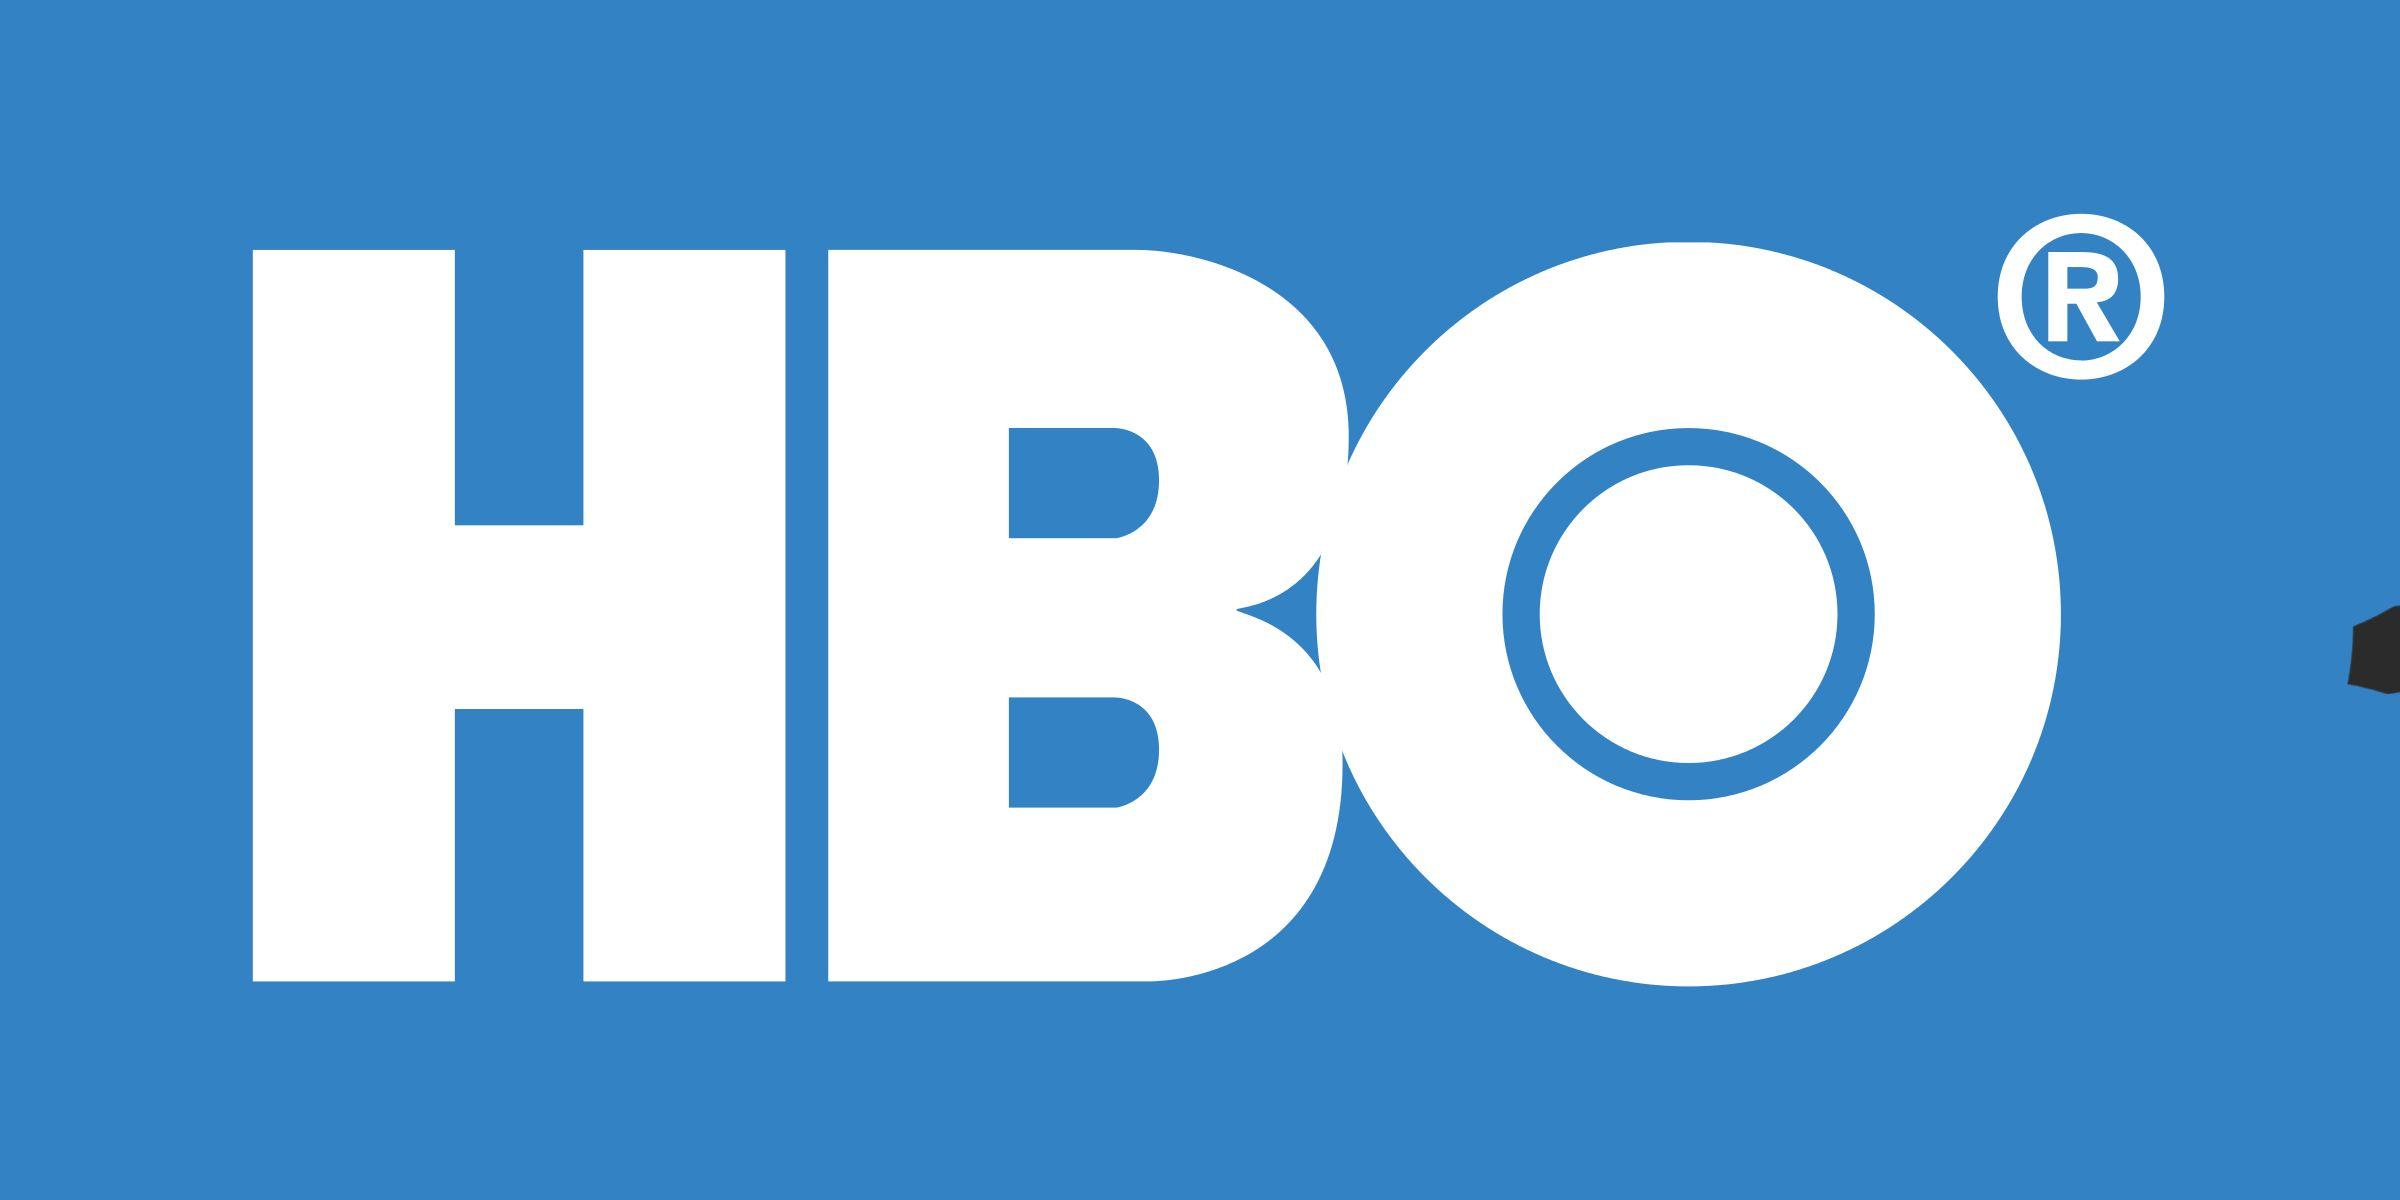 HBO Logo - HBO Logo, Home Box Office symbol, meaning